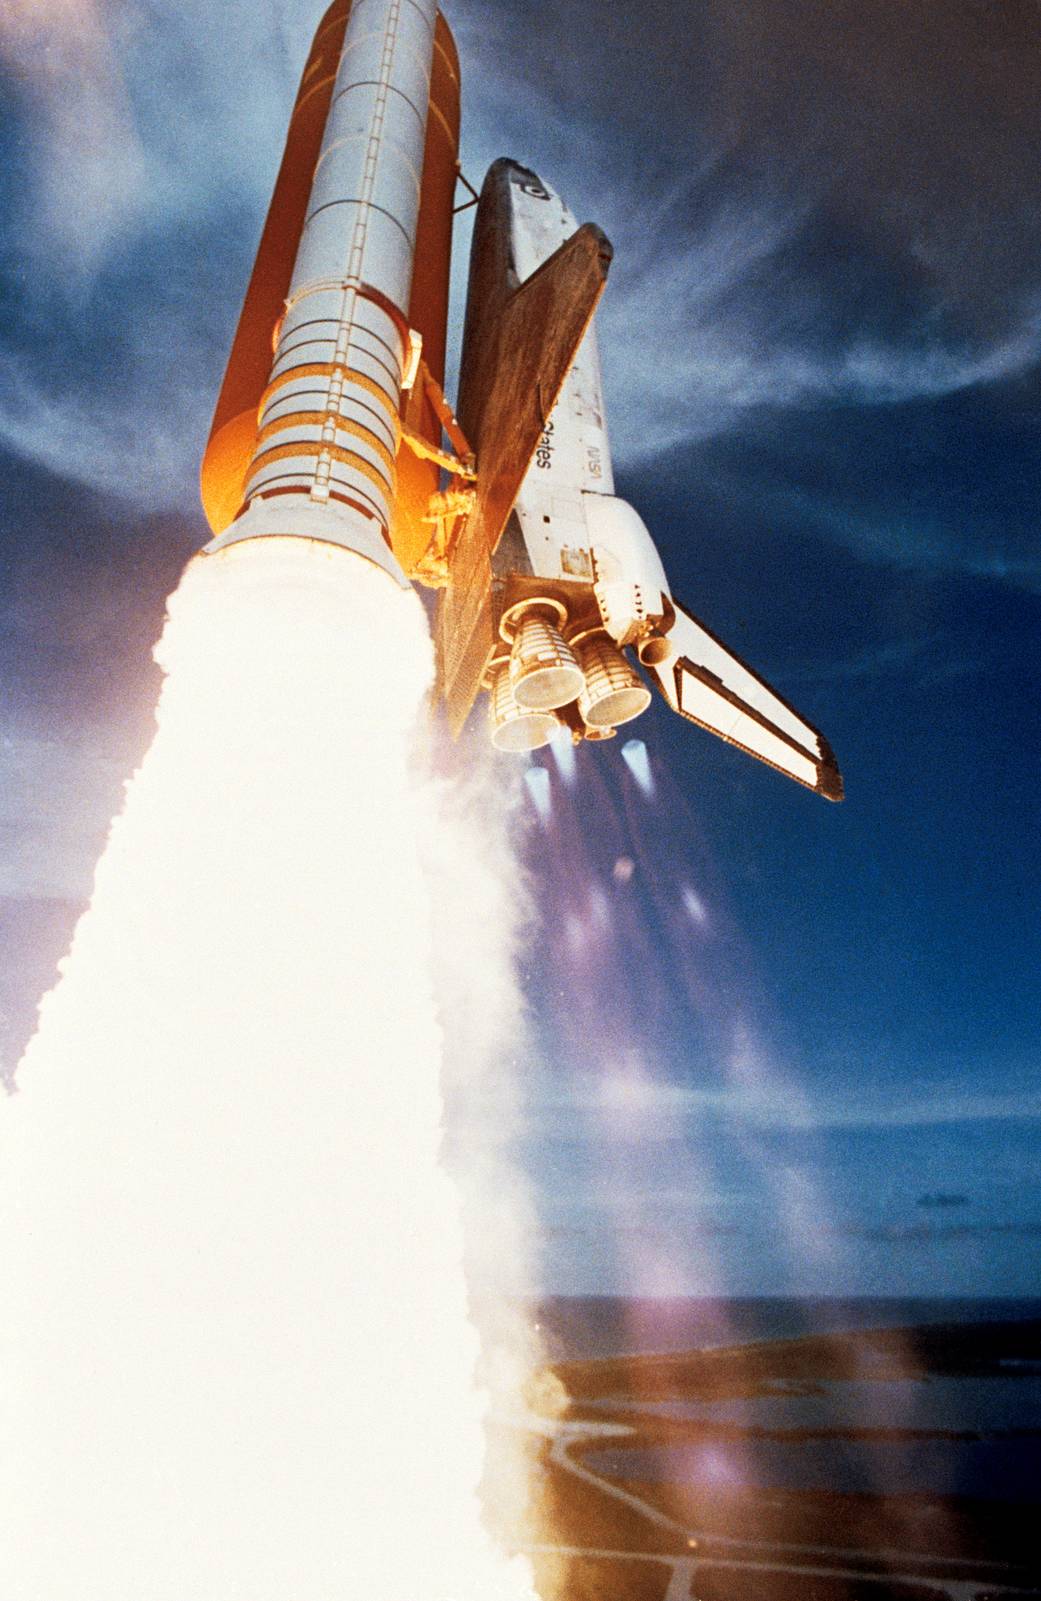 Shuttle Challenger launch on a week-long mission